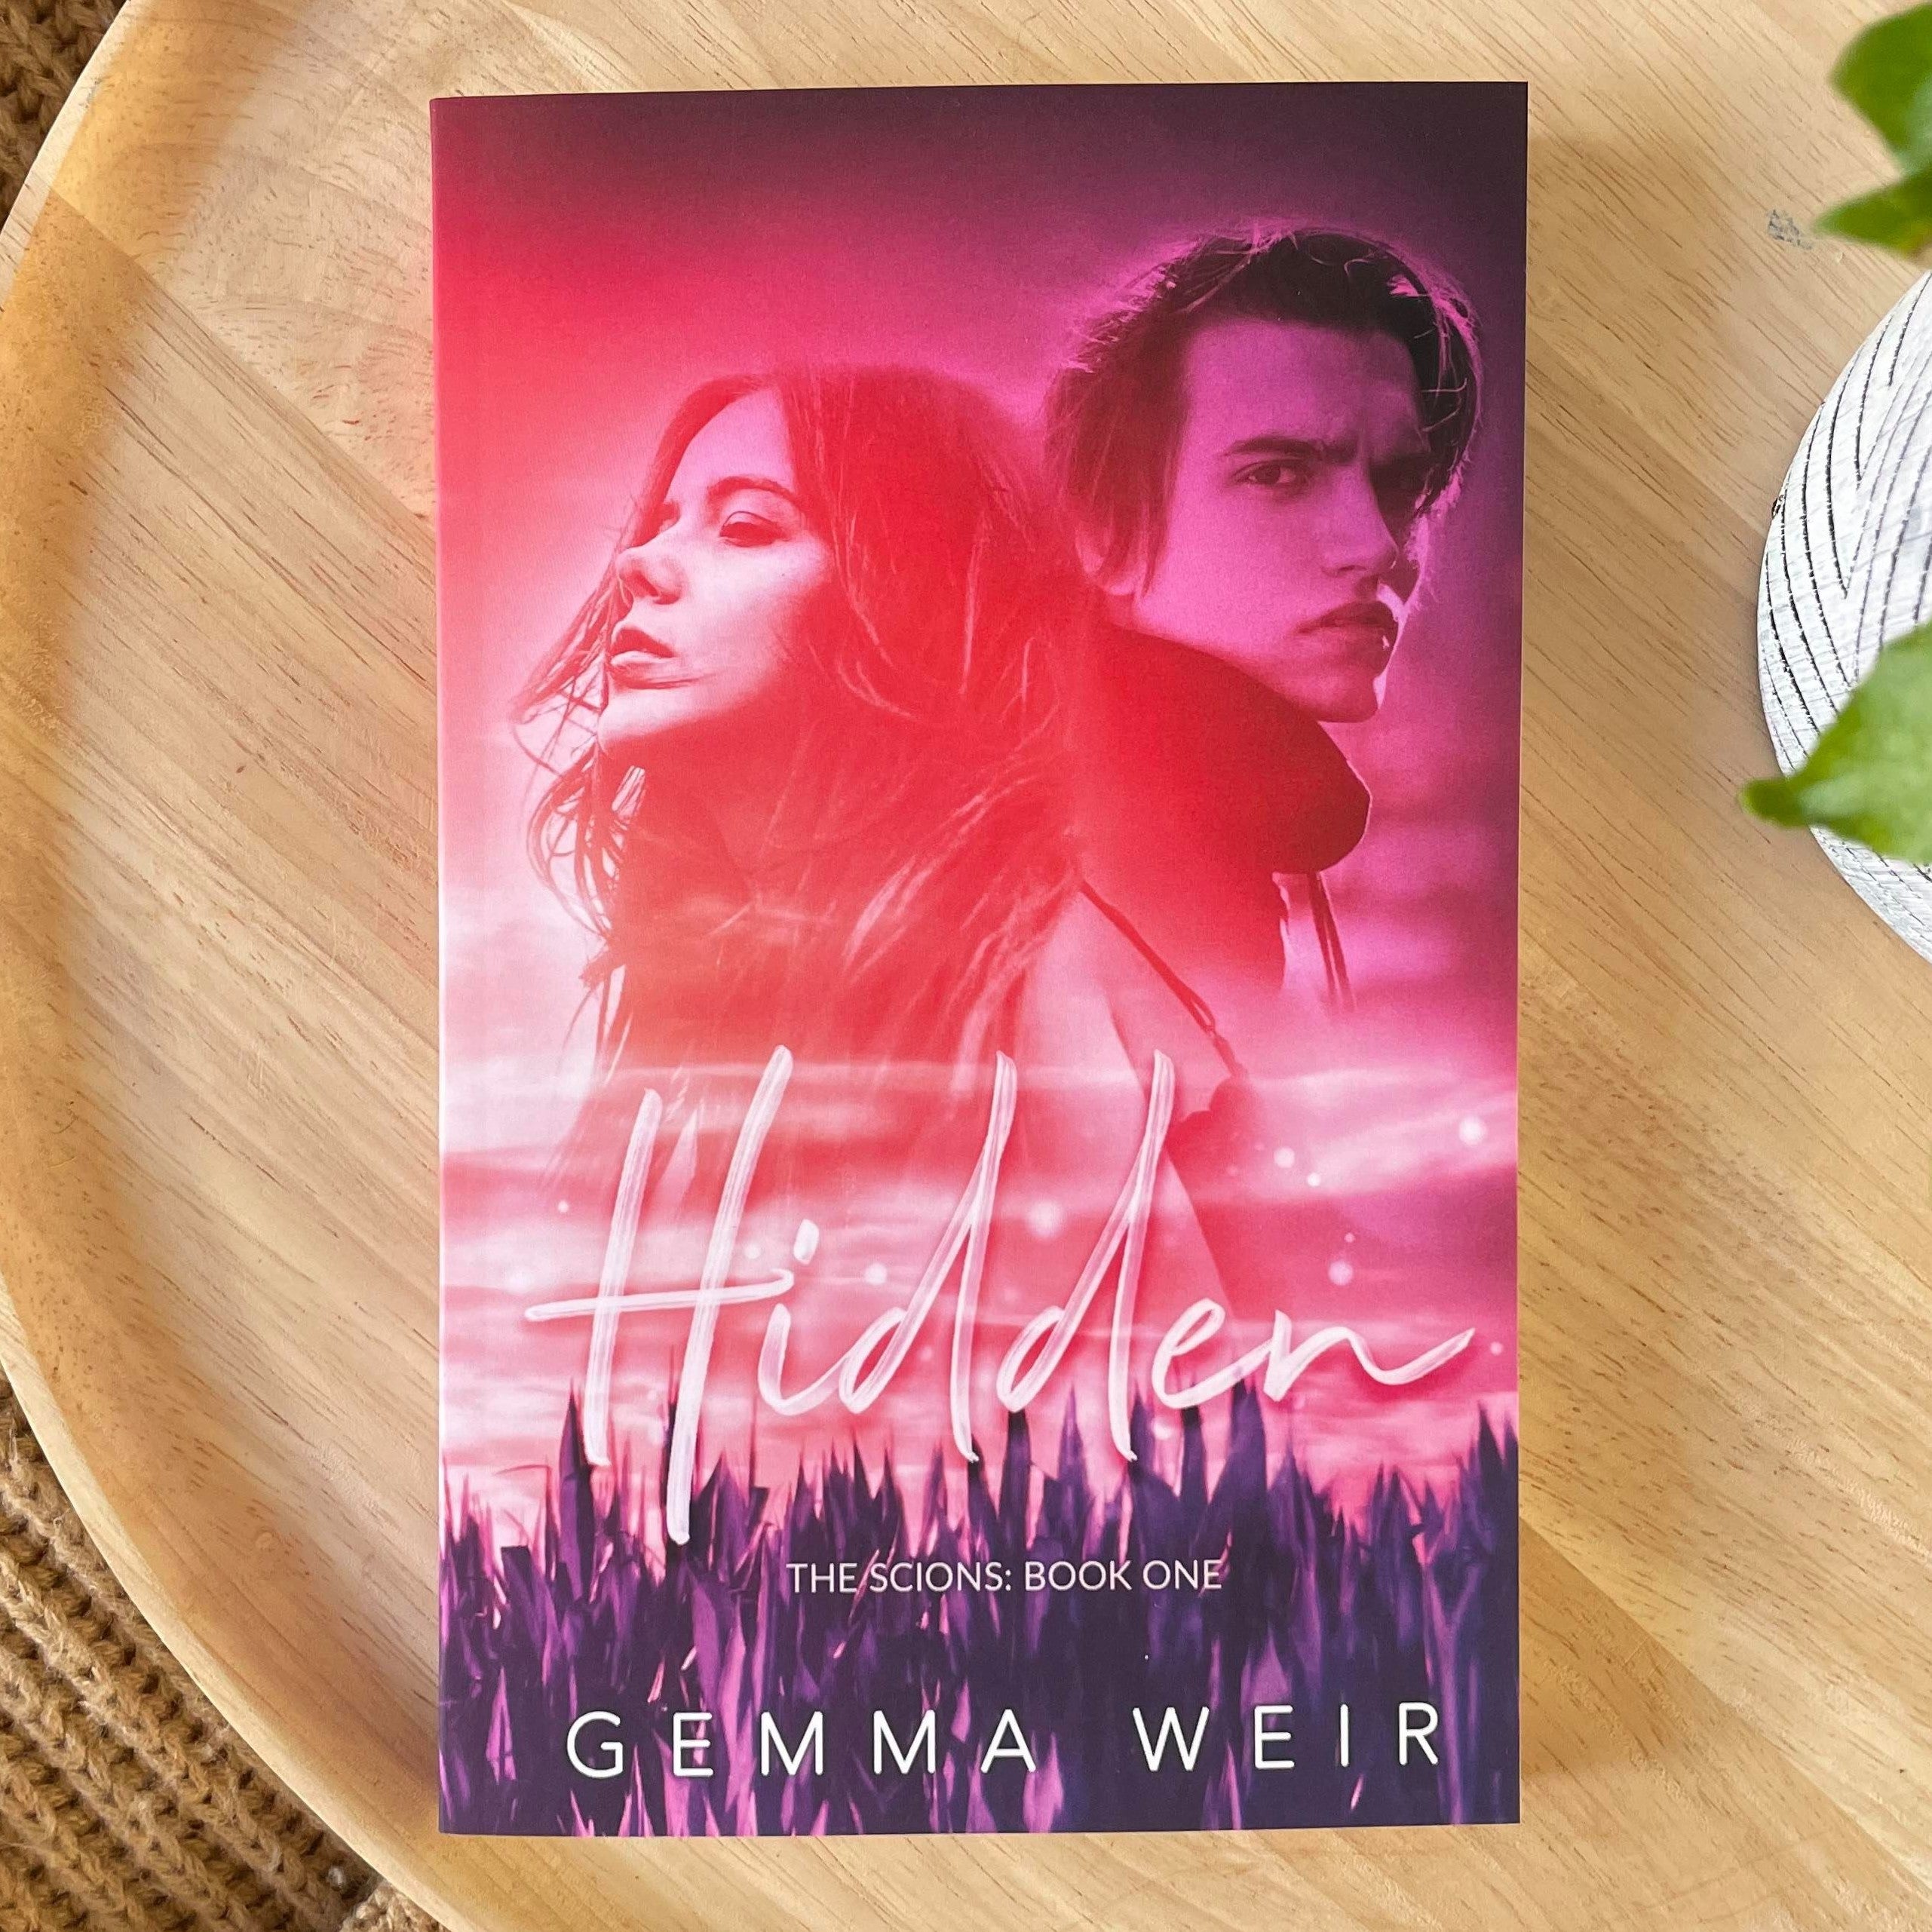 The Scions series by Gemma Weir